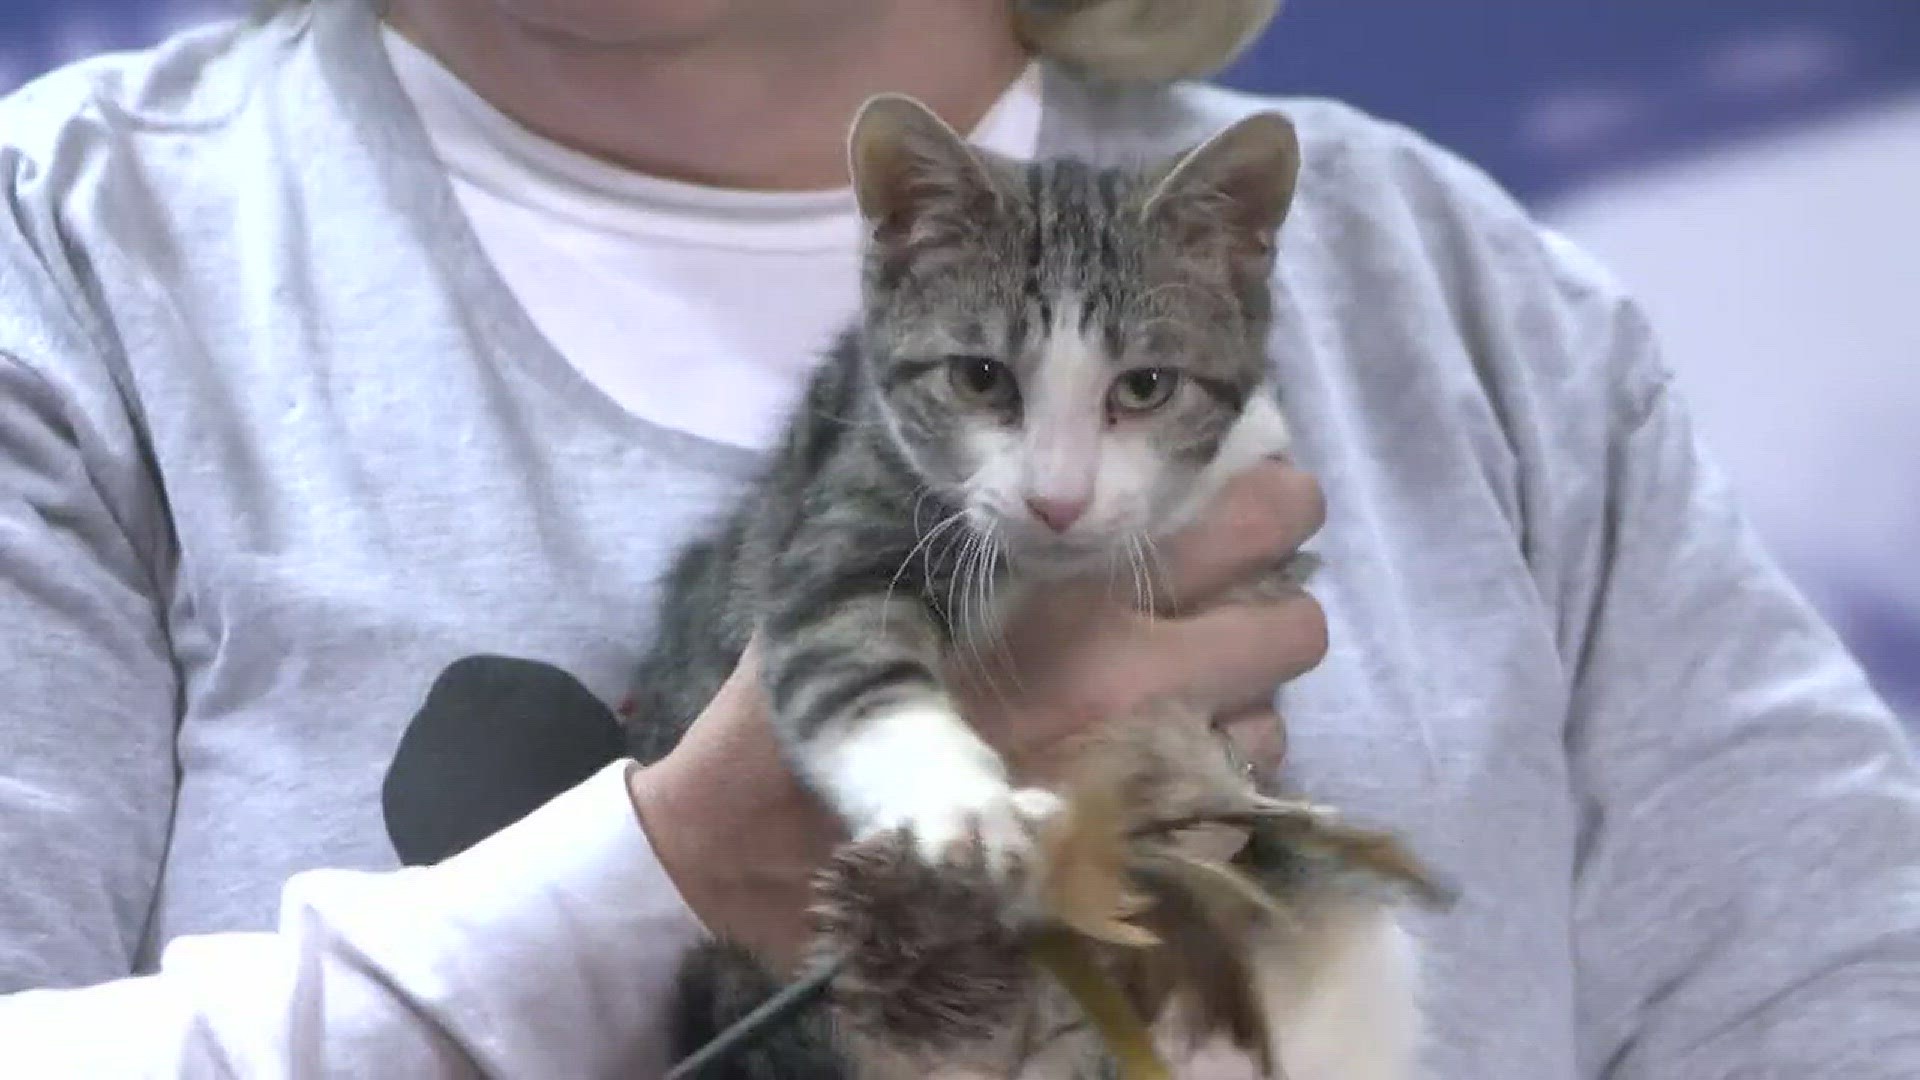 Leslie Taylor from Friends of the Animal Village brought in sweet little Theo, who is up for adoption.